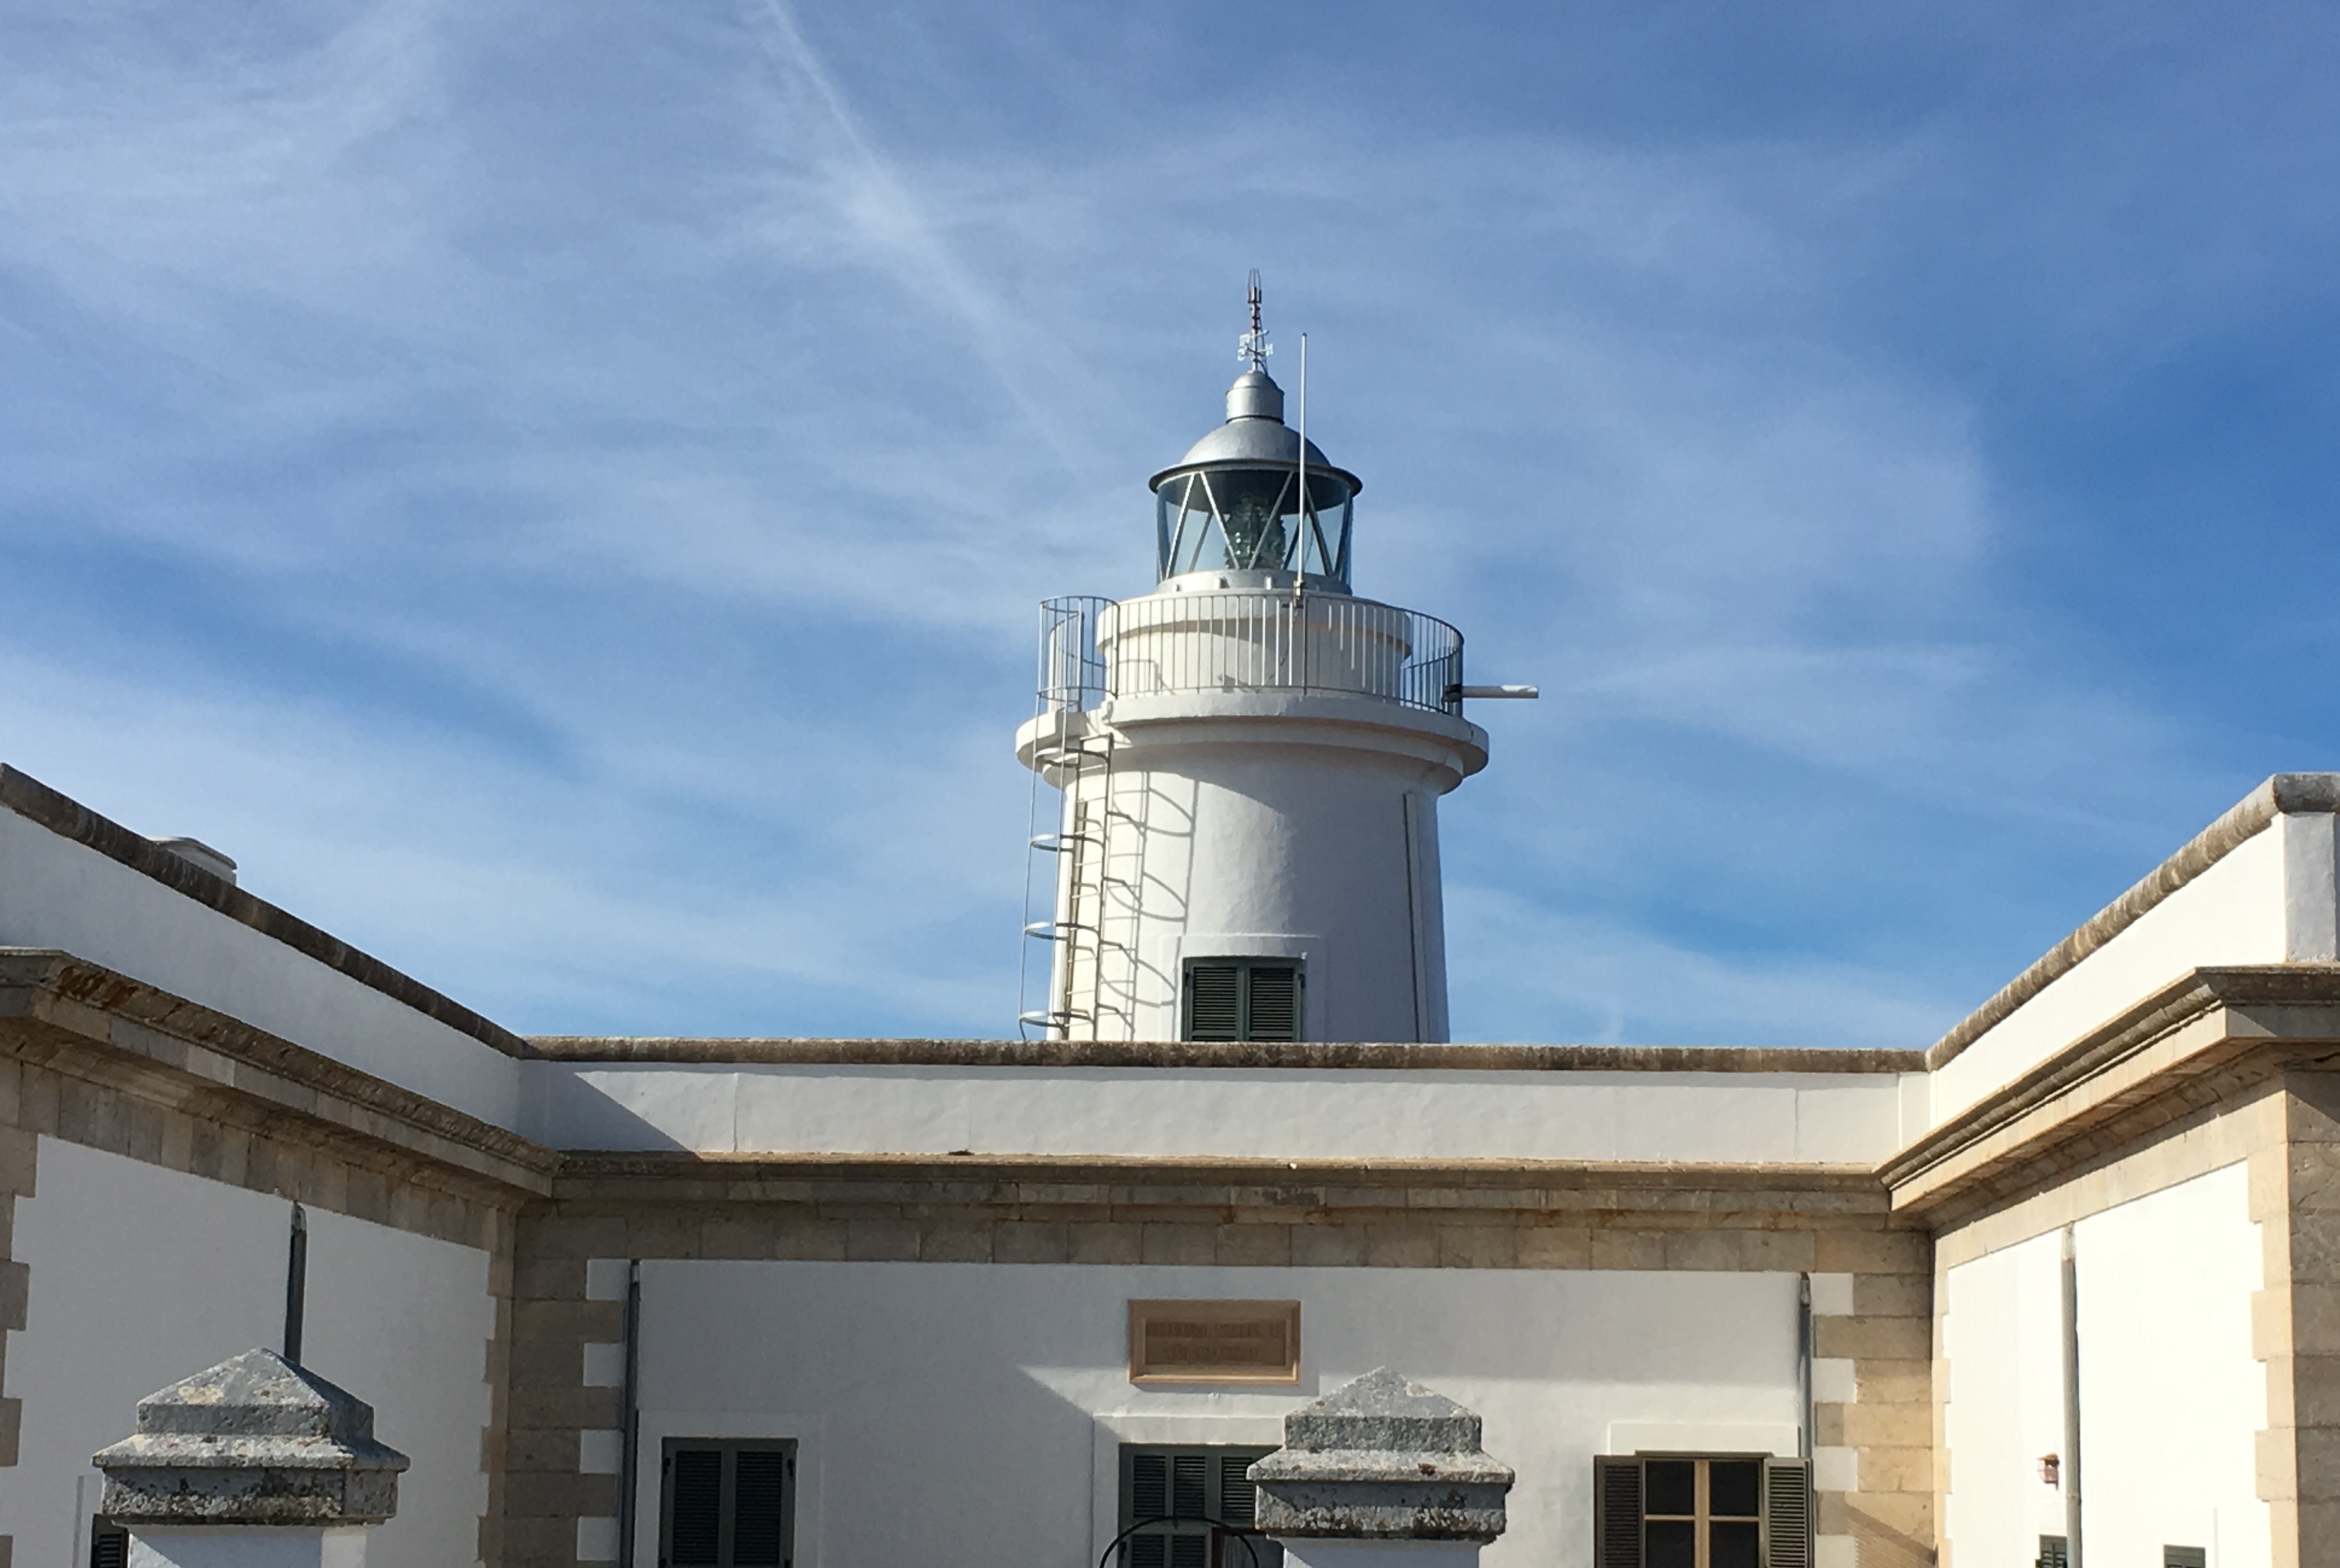 An image of the Cap Blanc Lighthouse, opened in 1863.